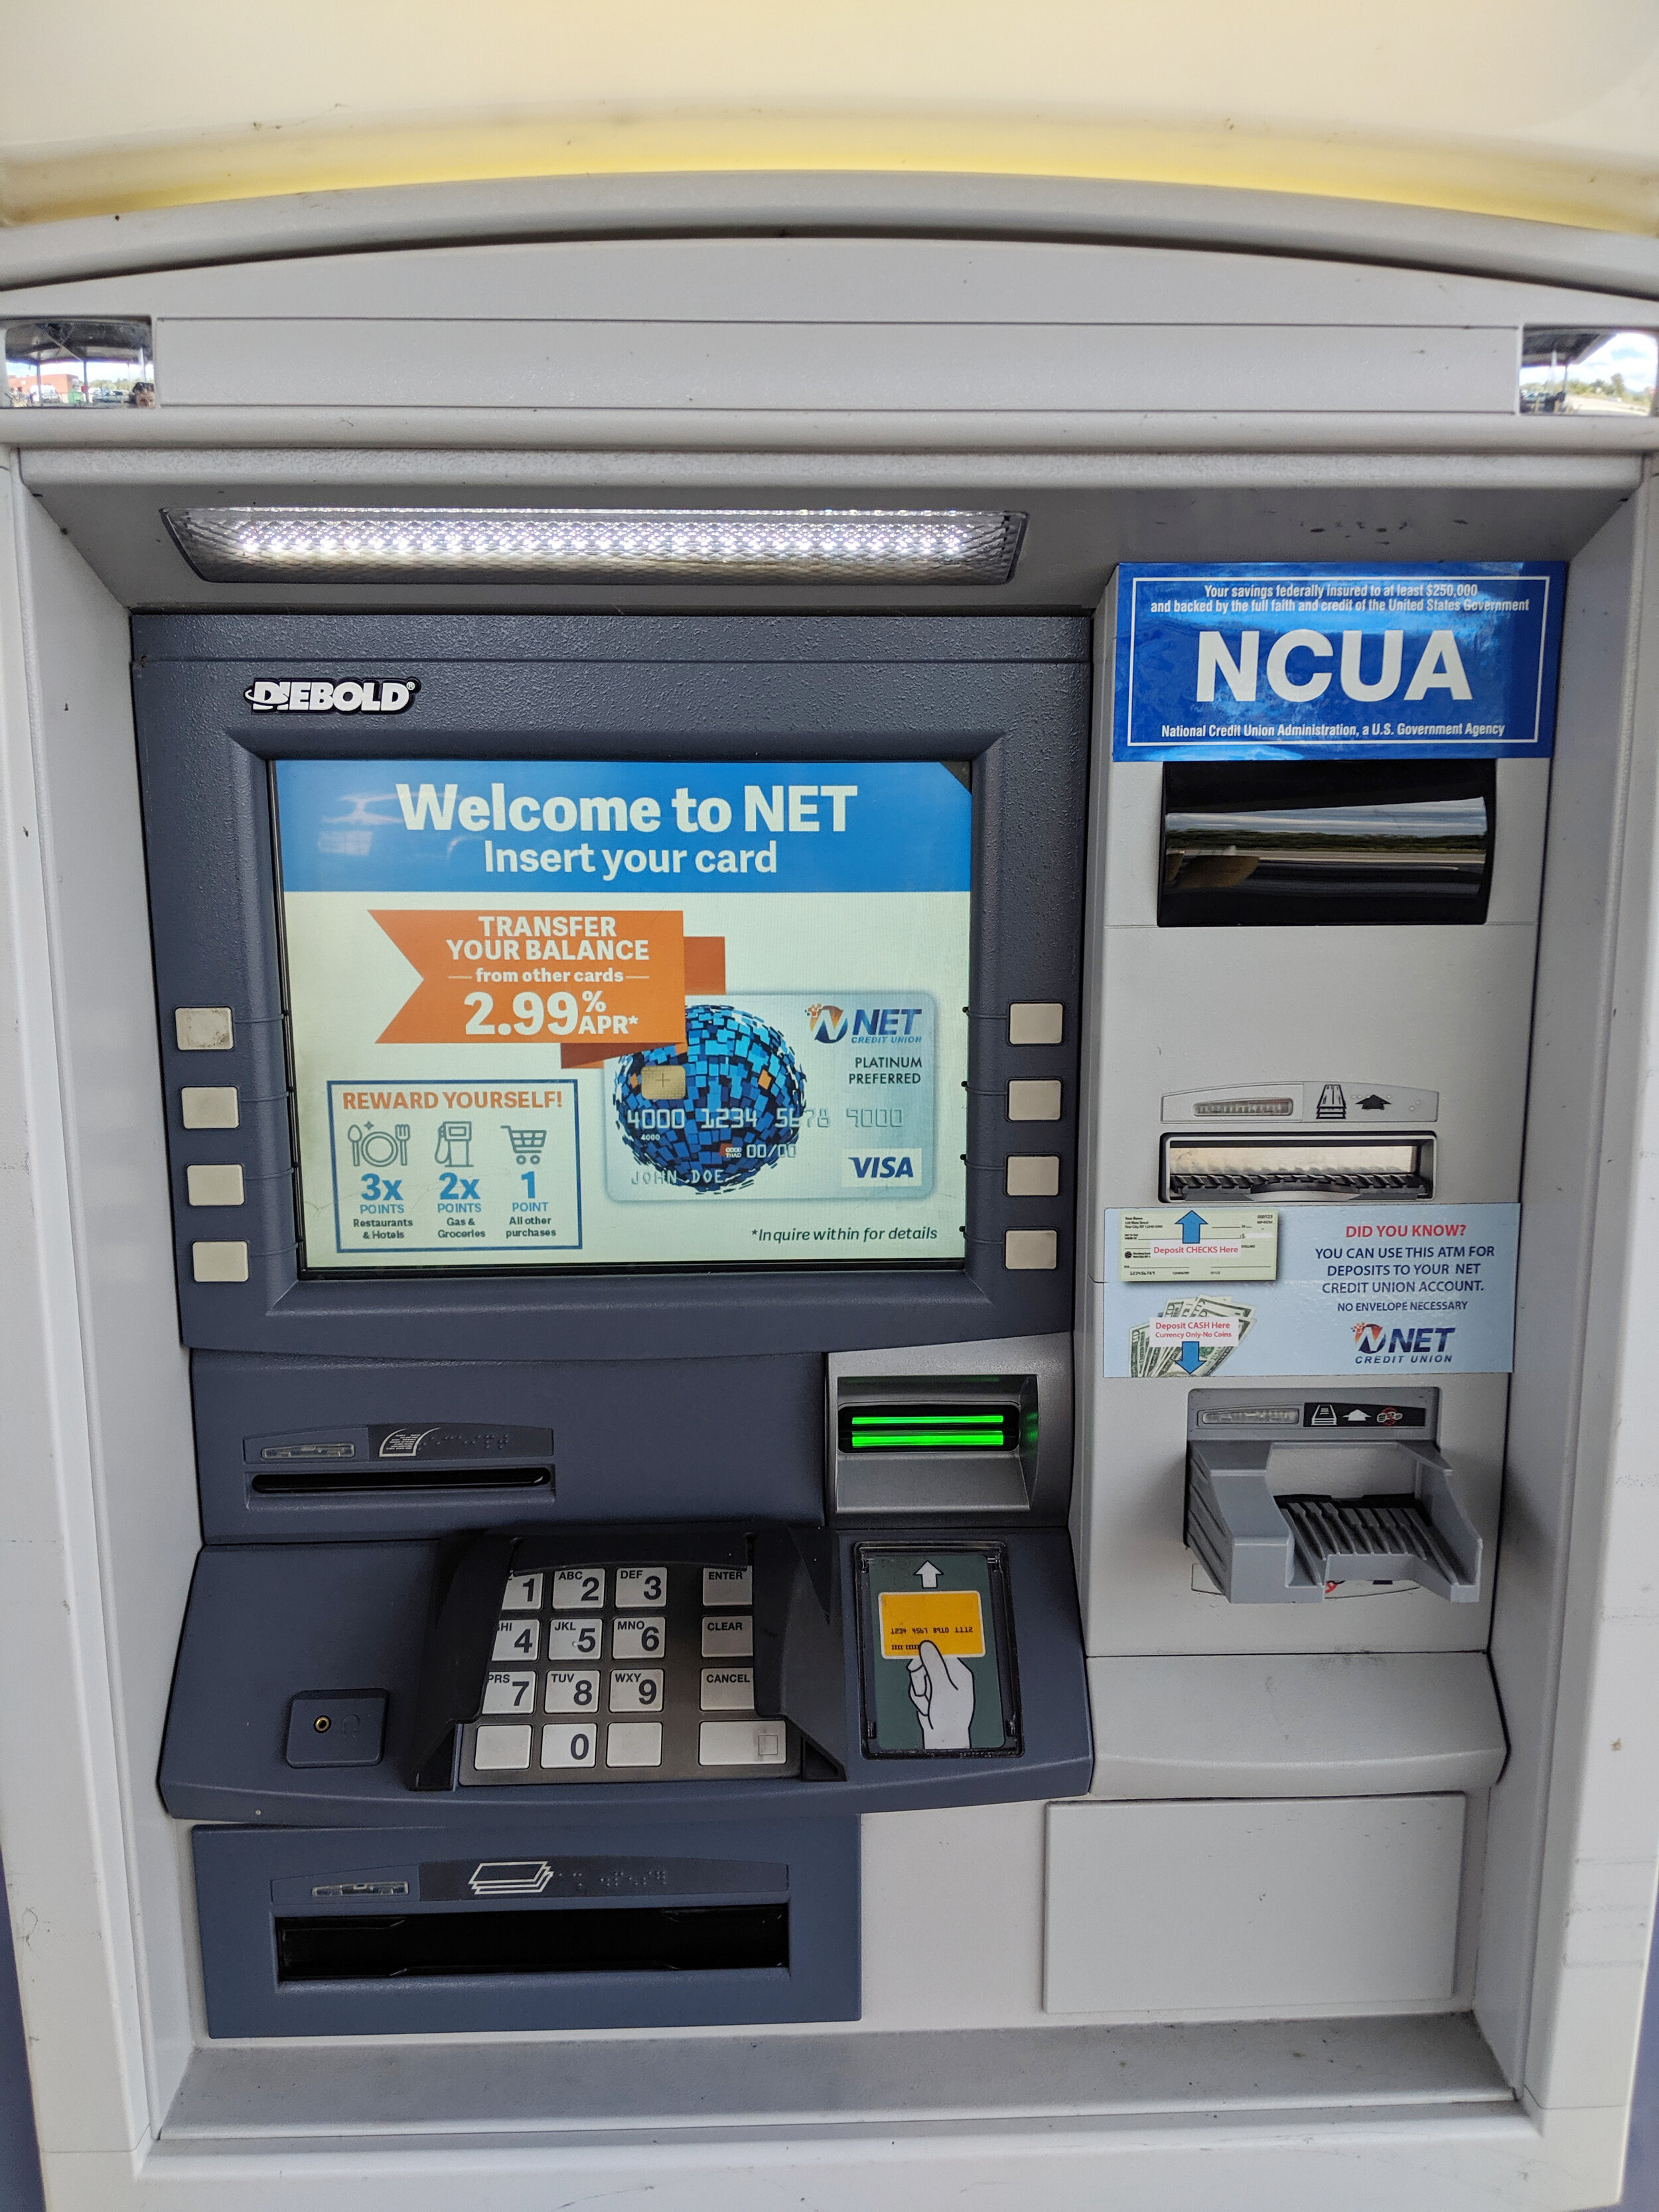 WELCOME ATM SCREEN